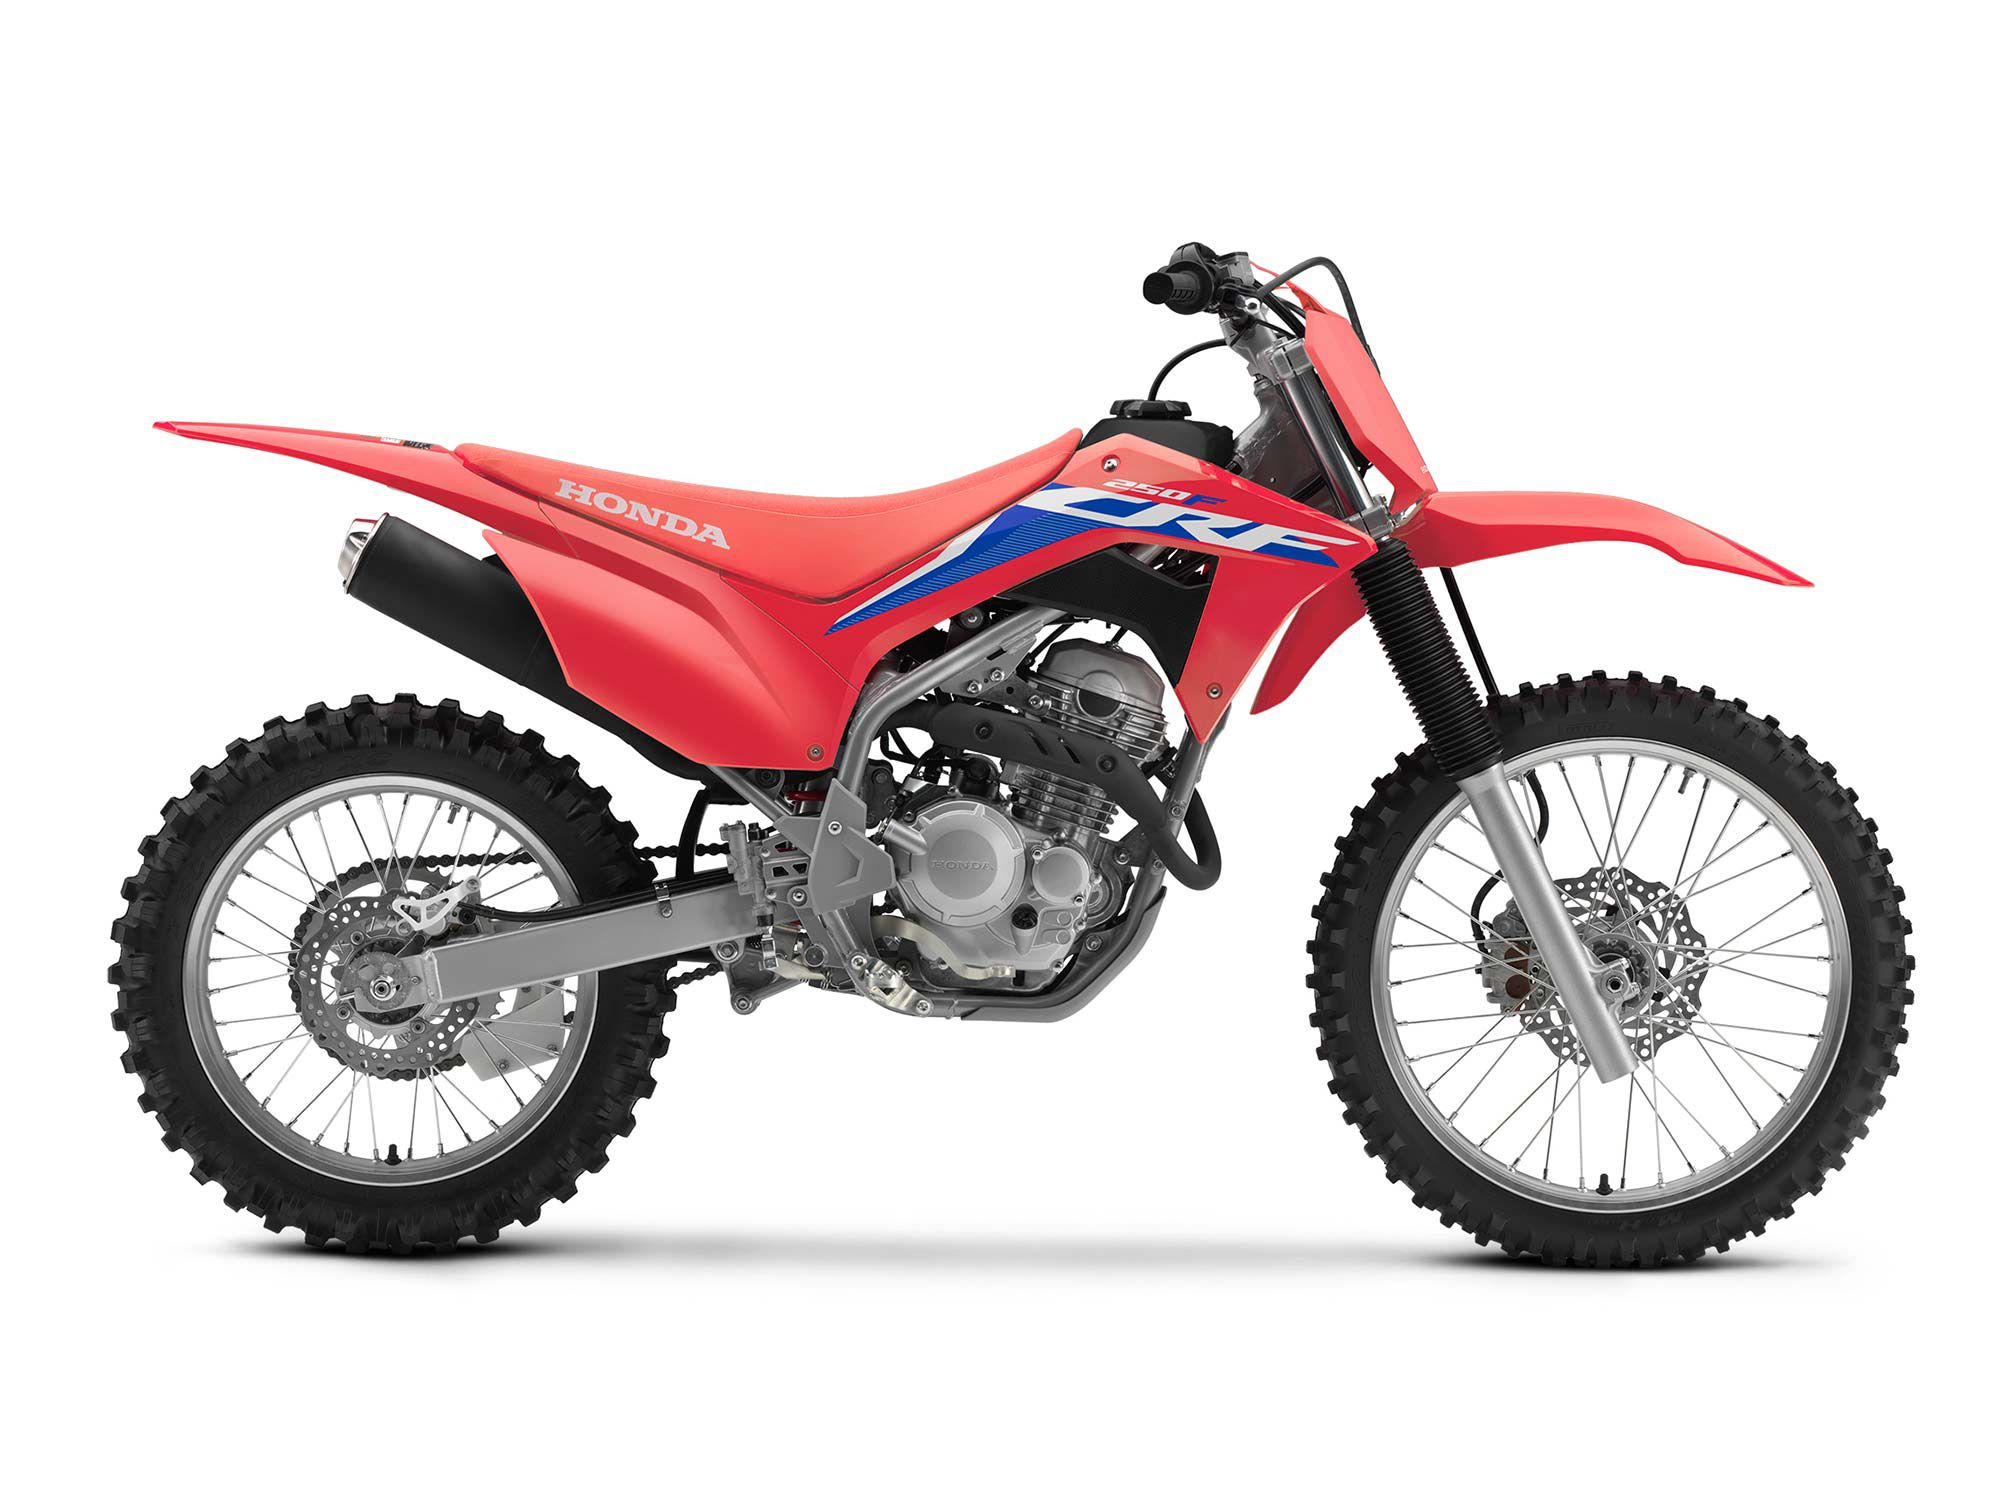 Honda’s CRF250F is a great choice for riders getting their feet wet off-road, but also well suited for tackling challenging terrain at the hands of more experienced riders.